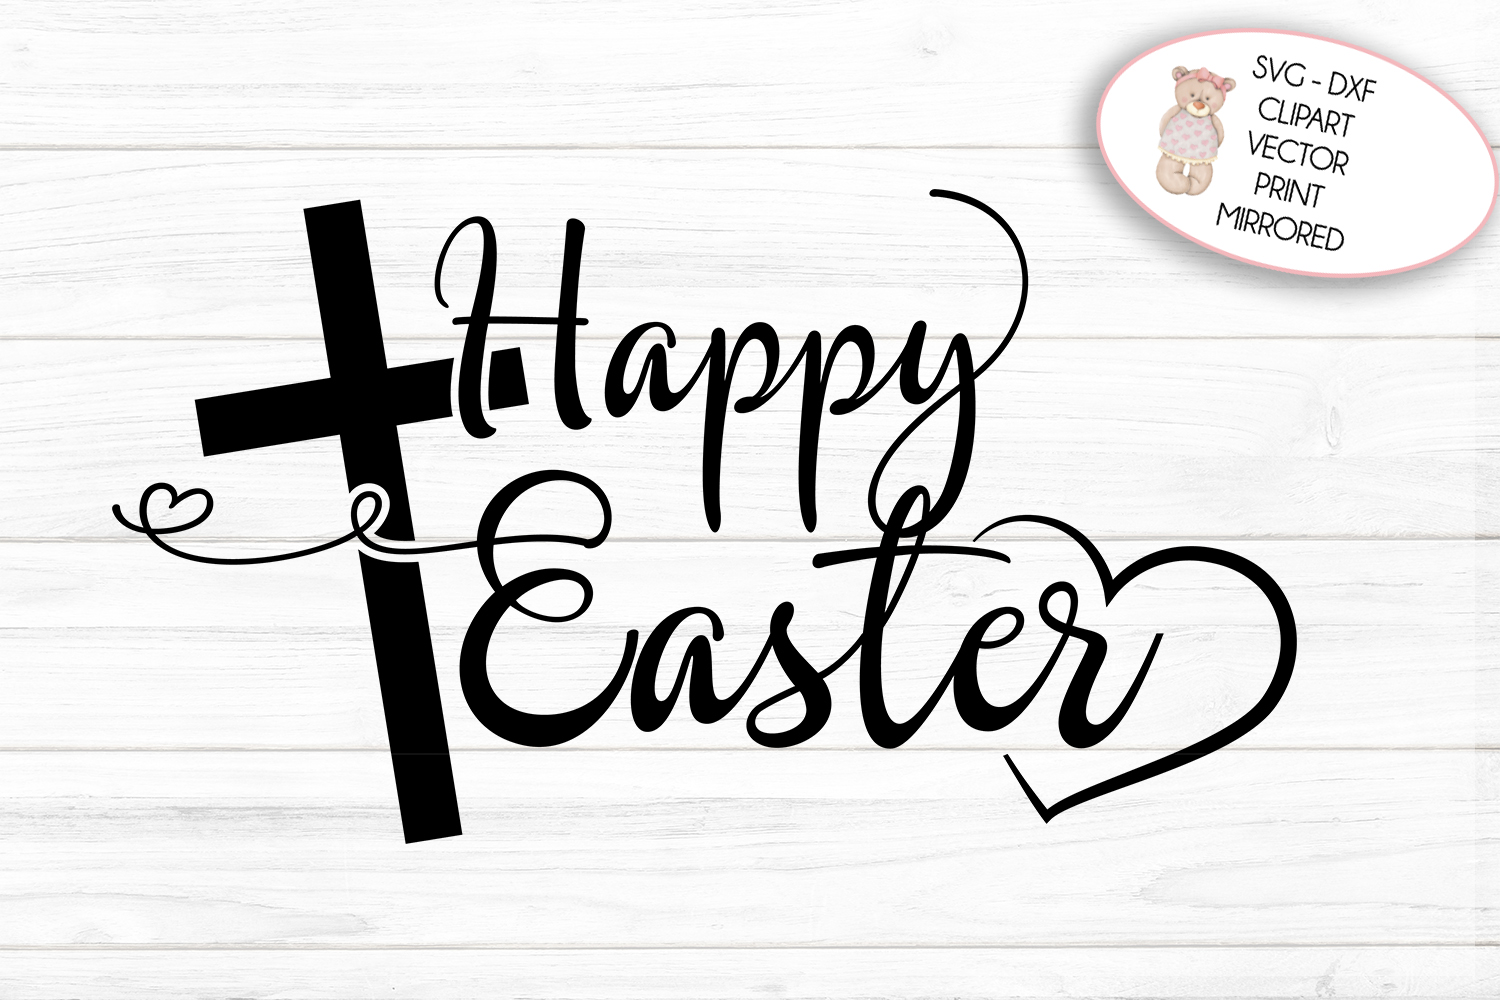 Download Happy Easter with Cross | svg cut file, clipart, print ...